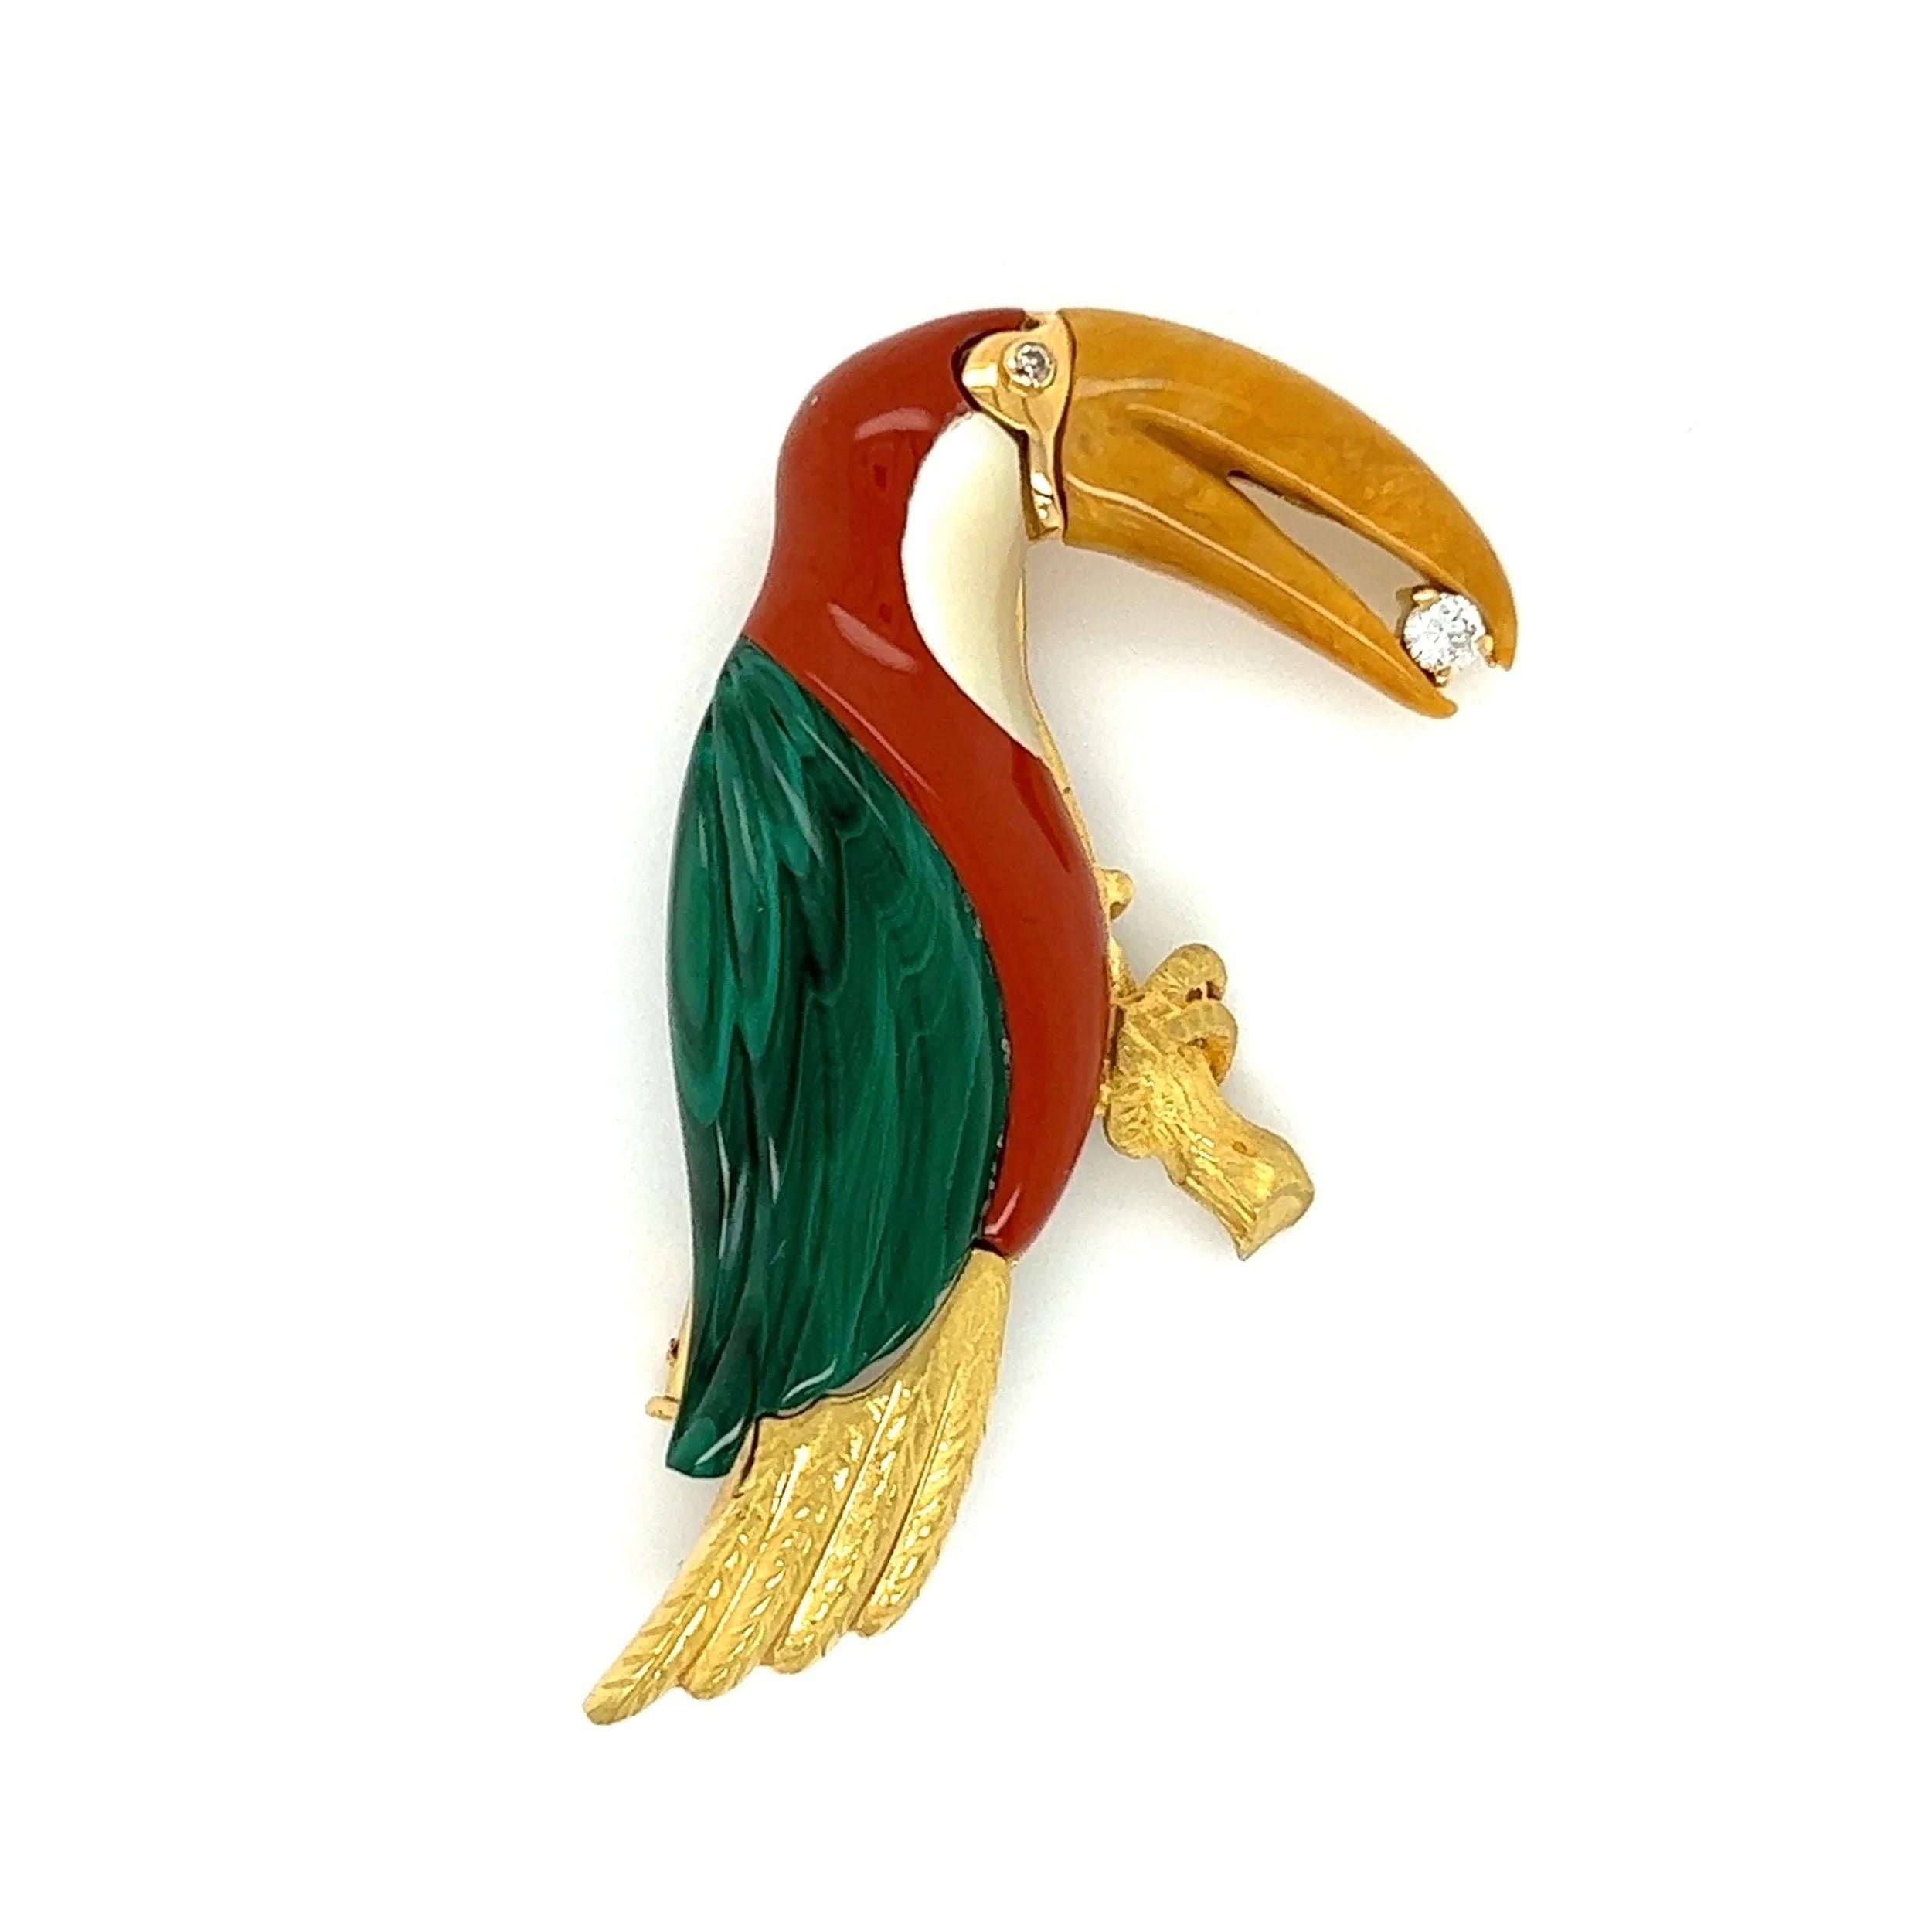 Simply Beautiful! Finely detailed Vintage Multi Gemstone and Diamond Wonderful Gold Toucan Brooch. Hand set with Malachite Jasper MOP Agate and Diamond, weighing approx. 0.06tcw. Exquisitely Hand crafted in 18K Yellow Gold. Approx. Dimensions: 1.75”